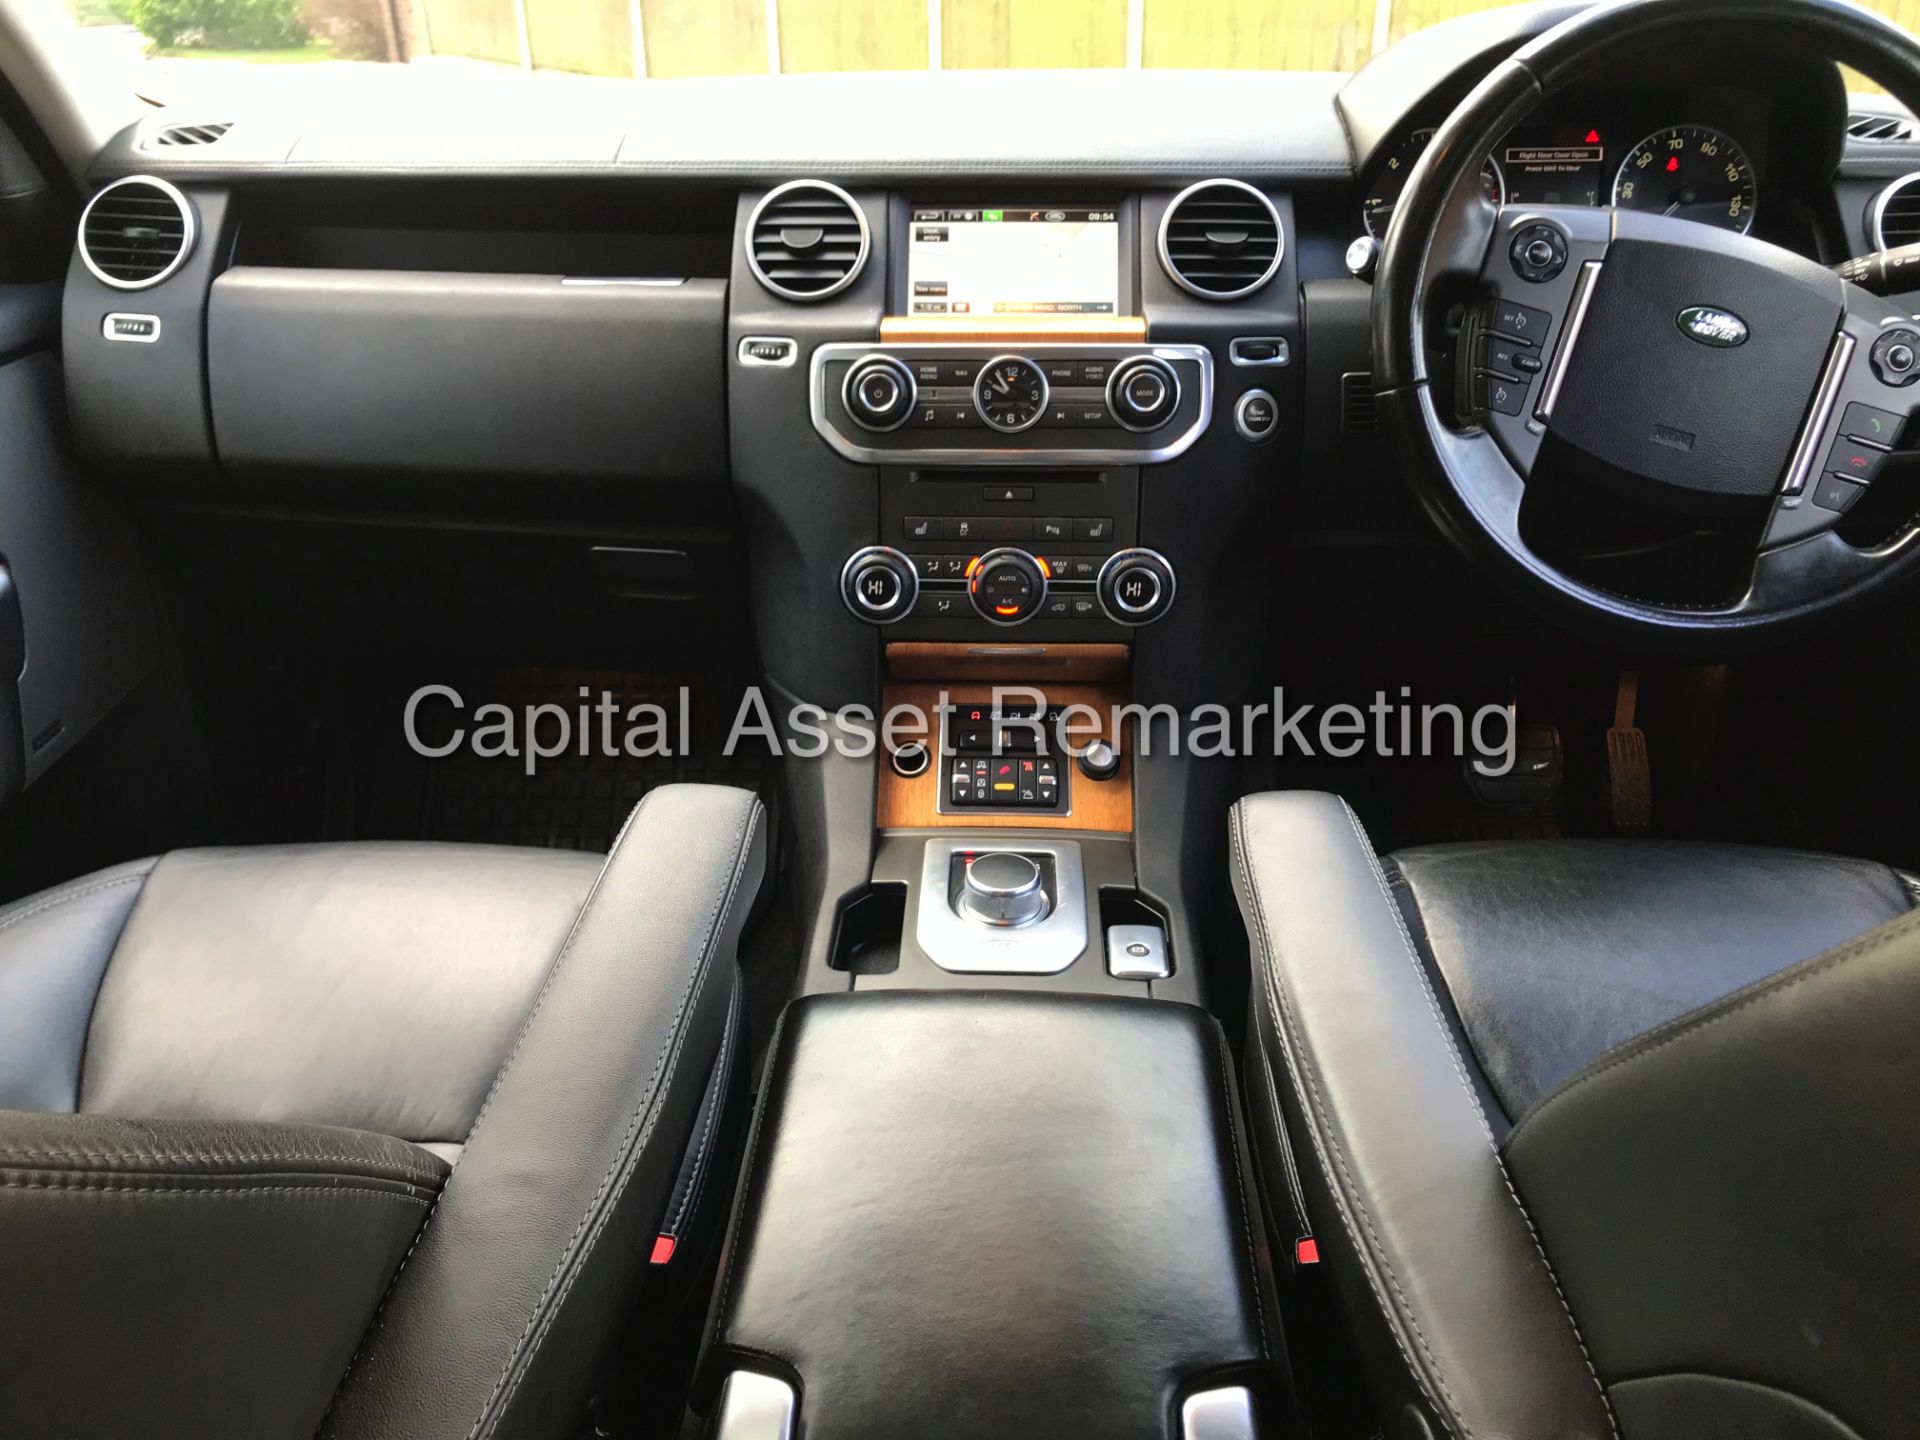 LAND ROVER DISCOVERY 4 "HSE" 3.0 SDV6 AUTOMATIC (13 REG) 7 SEATER - FULL LEATHER - SAT NAV *LOOK* - Image 11 of 25